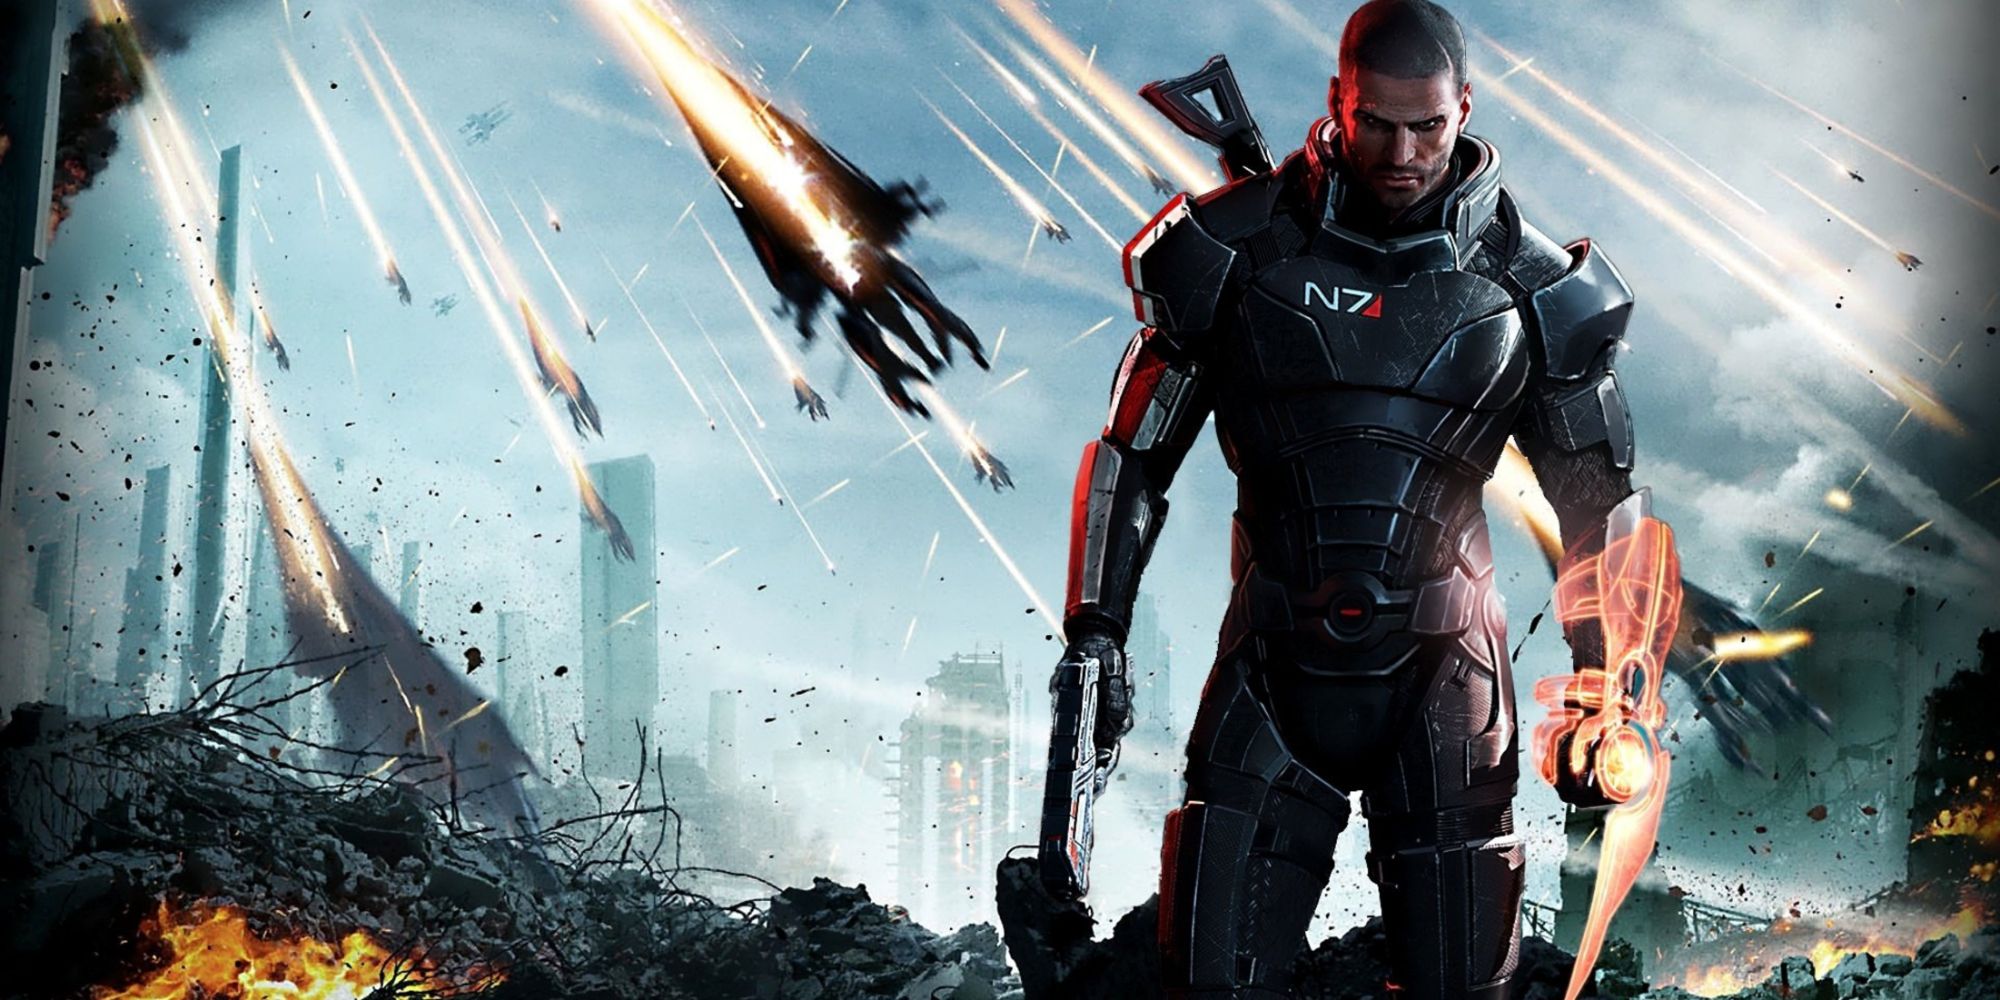 Mass Effect is the pinnacle of space opera gaming